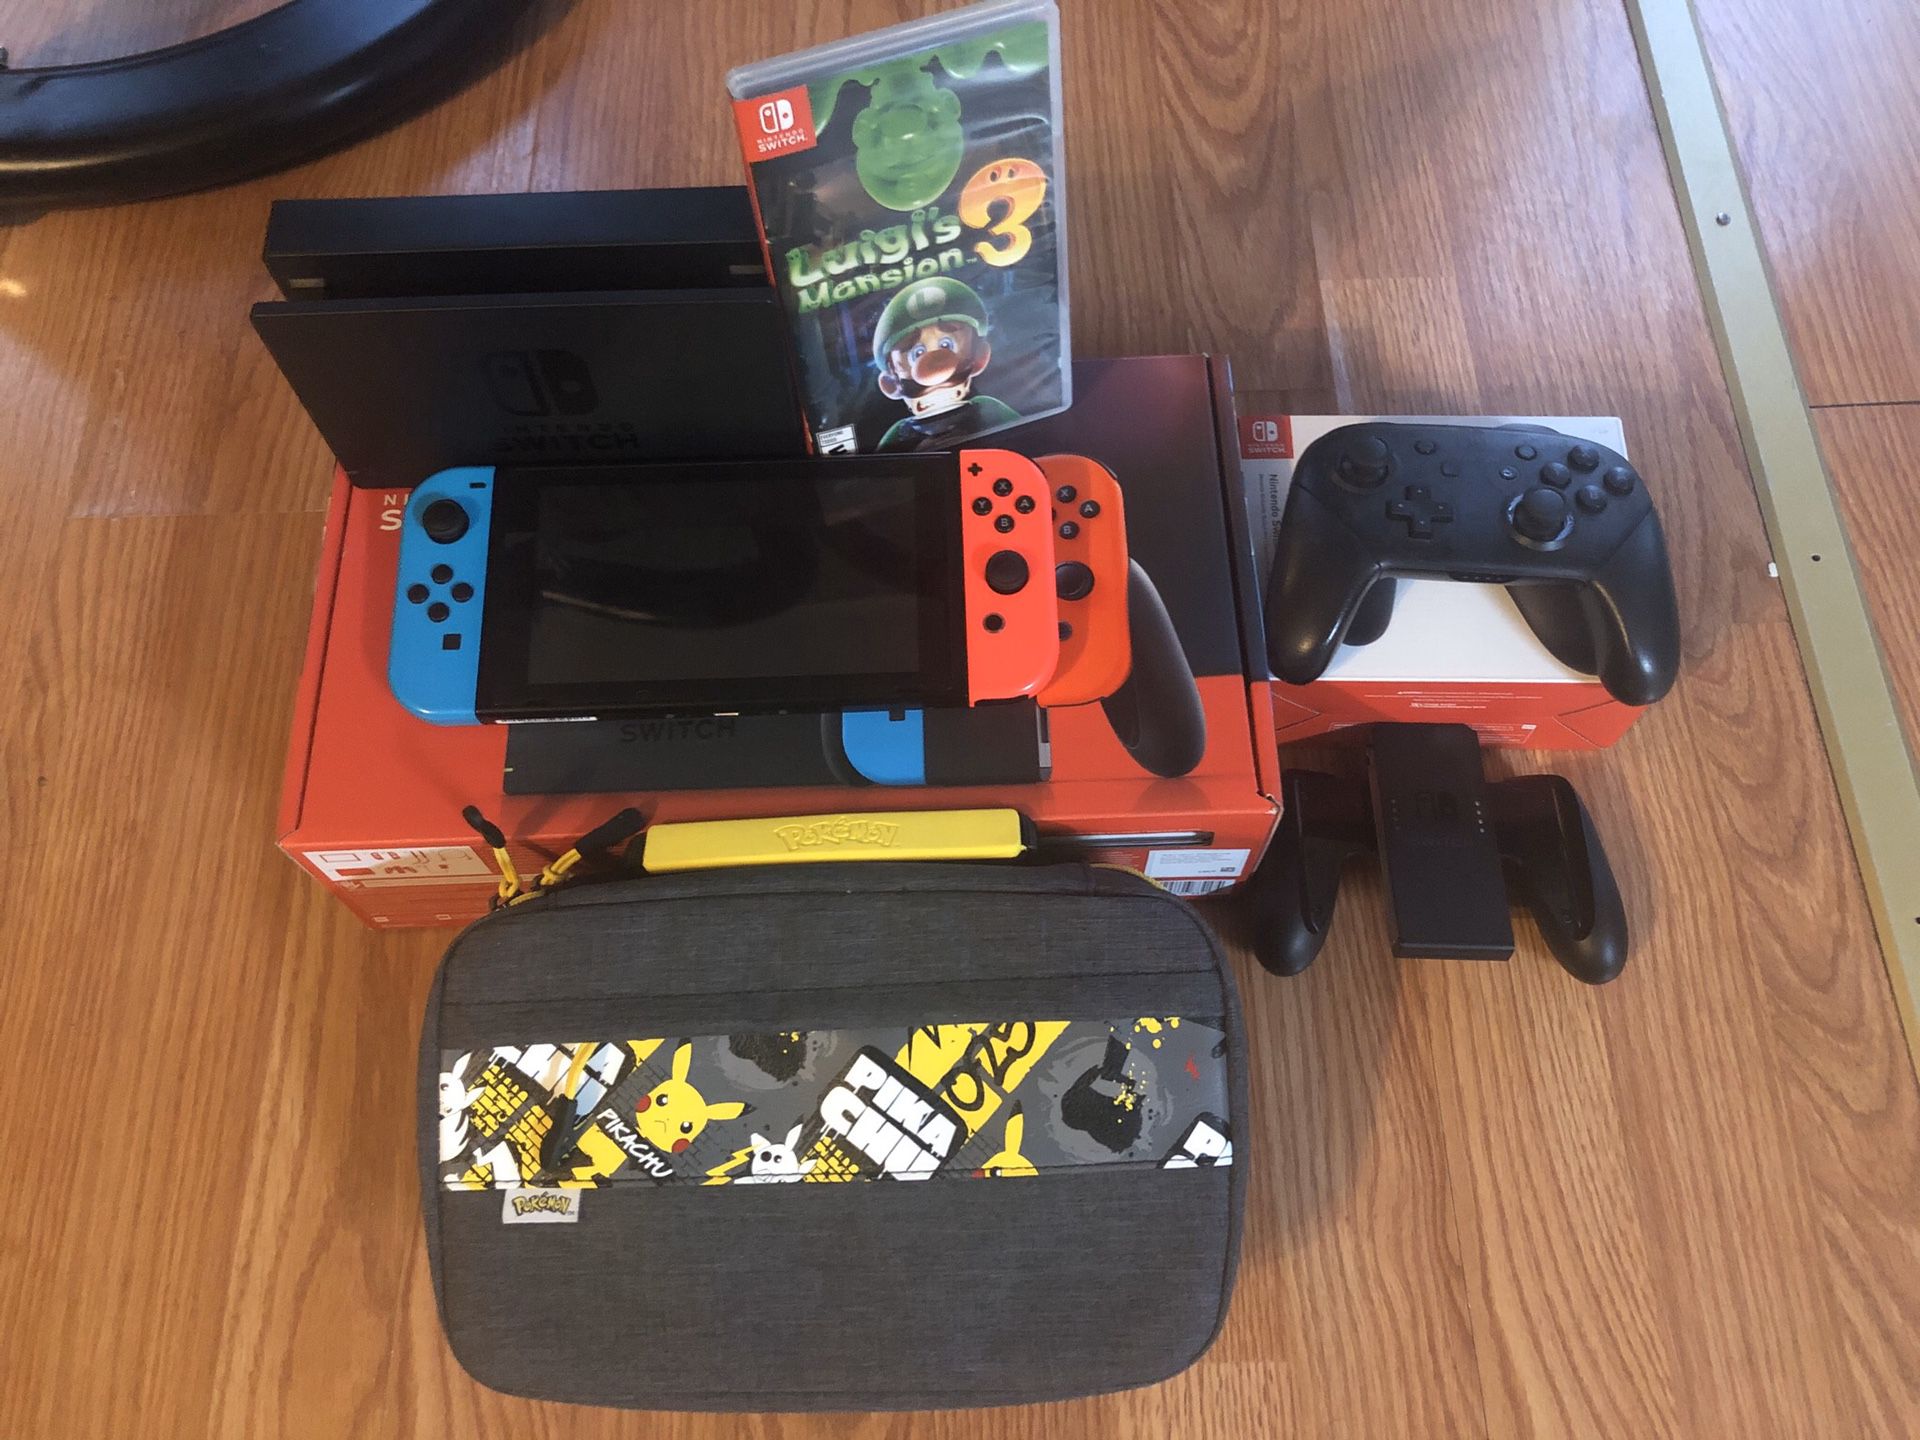 Nintendo switch v2 with pro controller and carrying case along with 5 games!